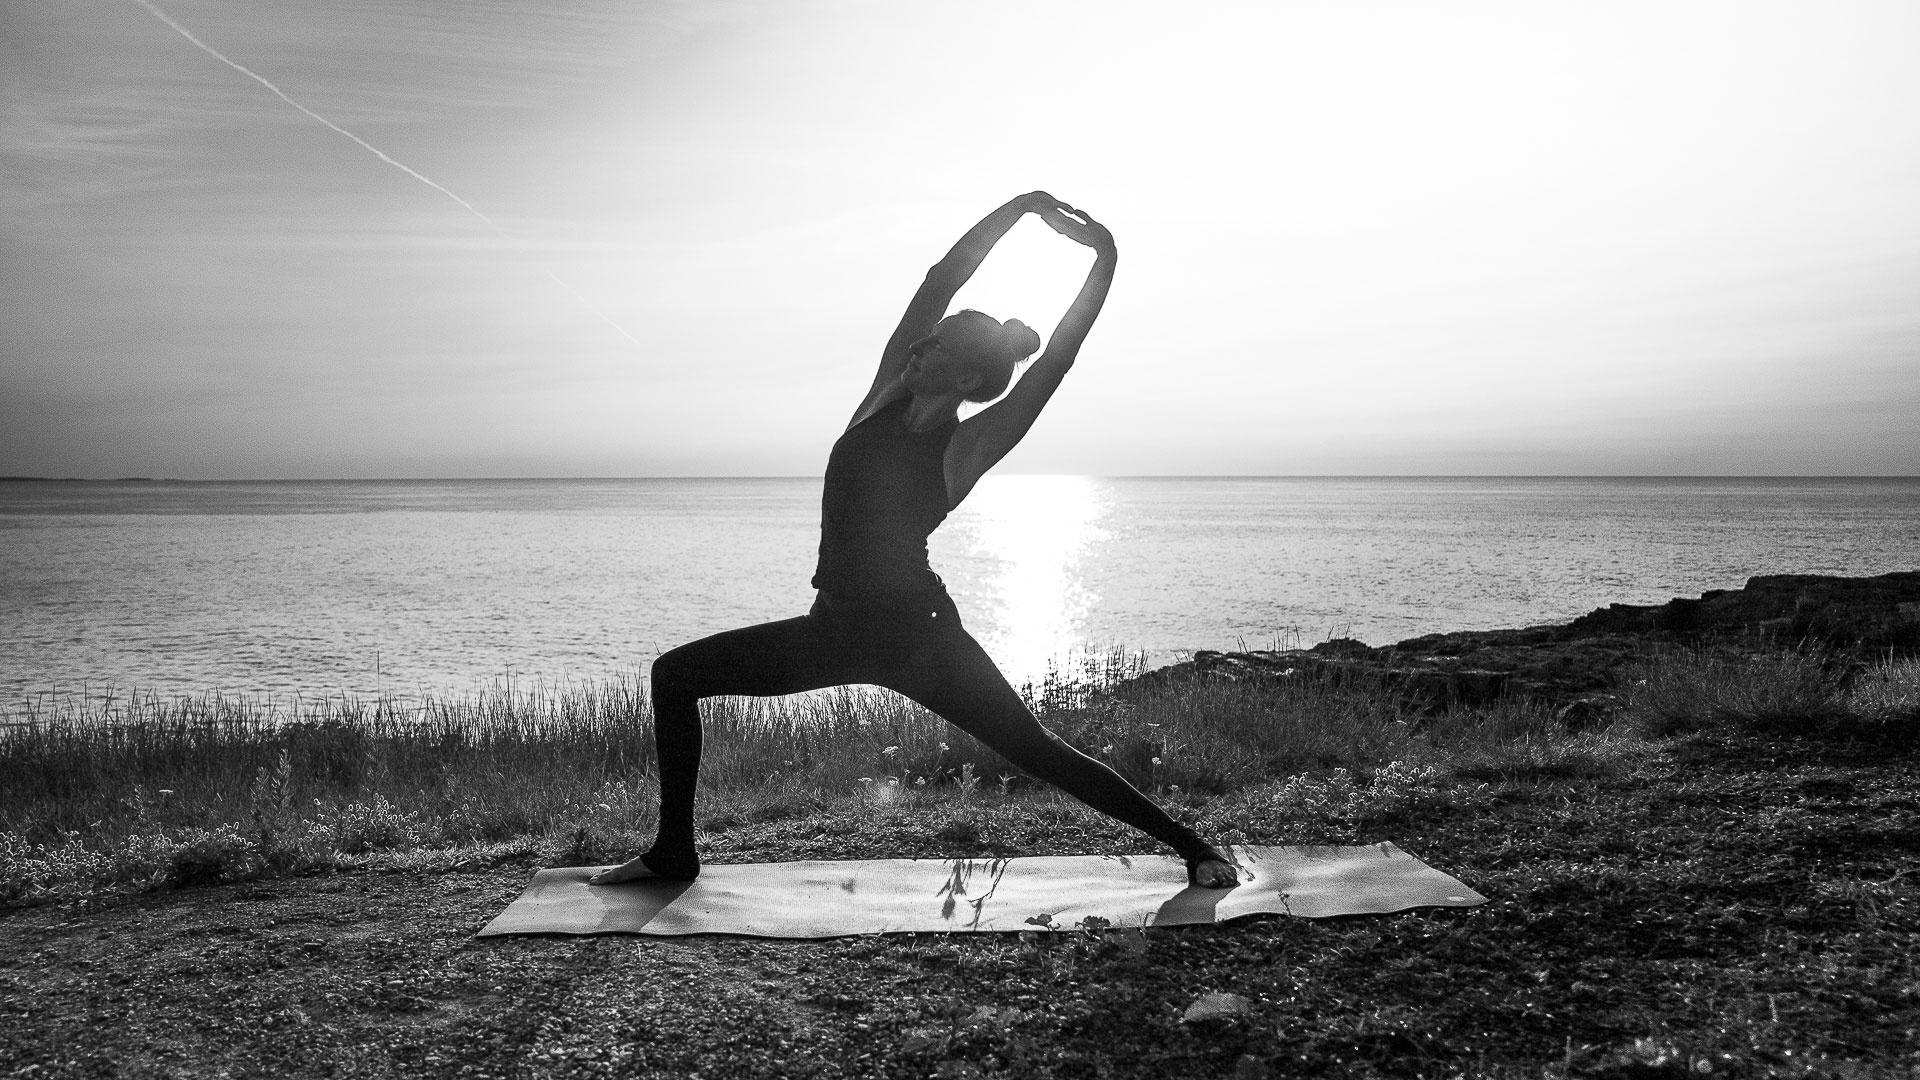 Gray Yoga – Between Black And White We Find Gray